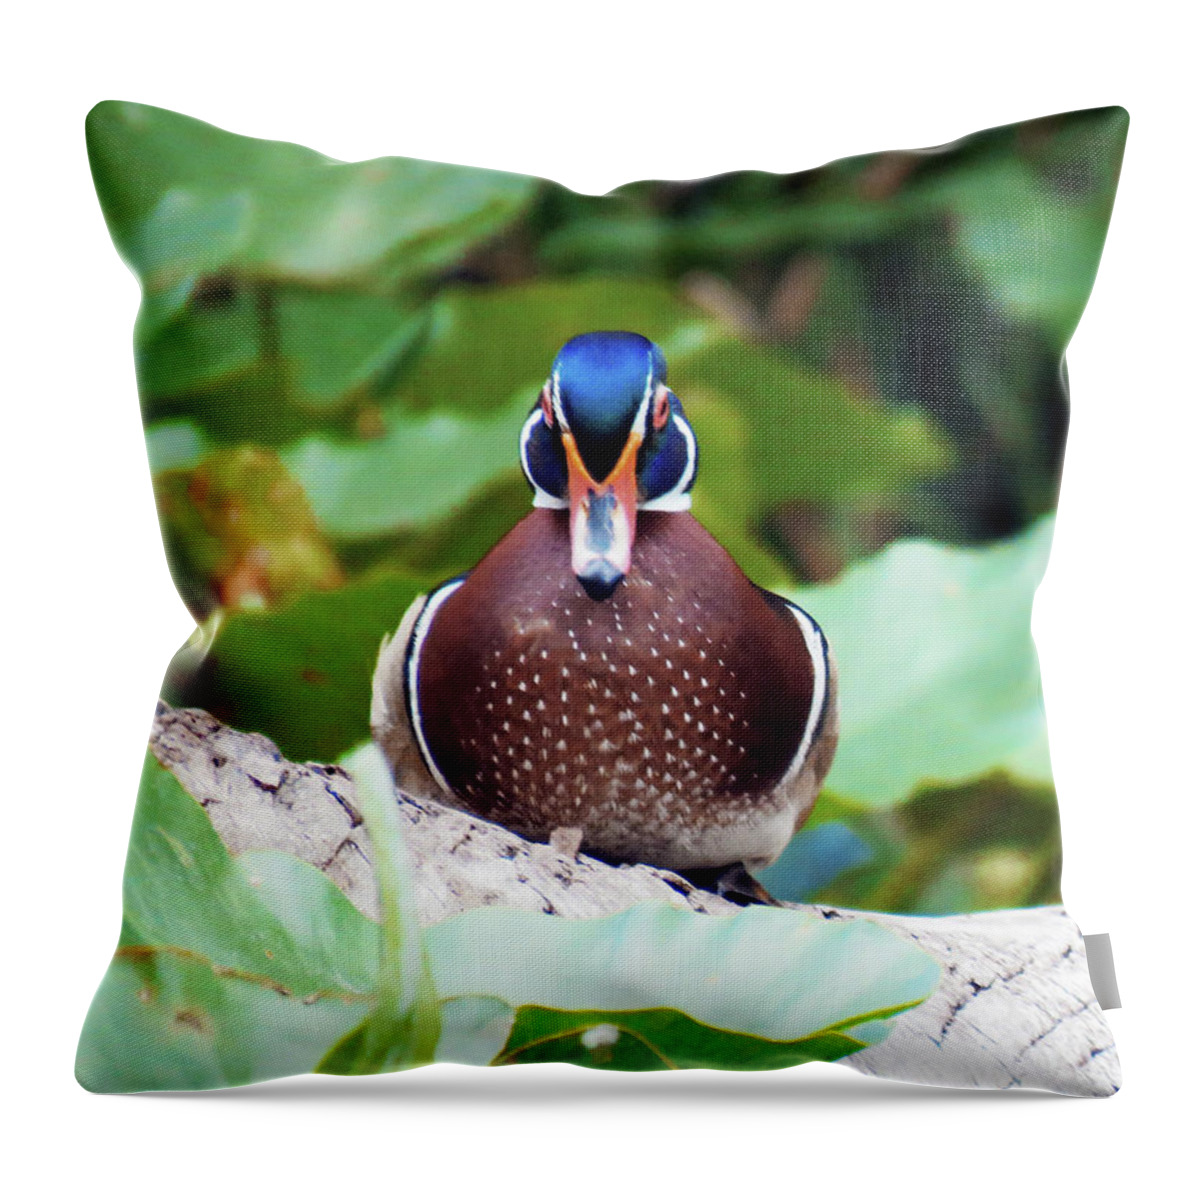 Florida Throw Pillow featuring the photograph Surroundings - Florida Wood Duck by Chris Andruskiewicz